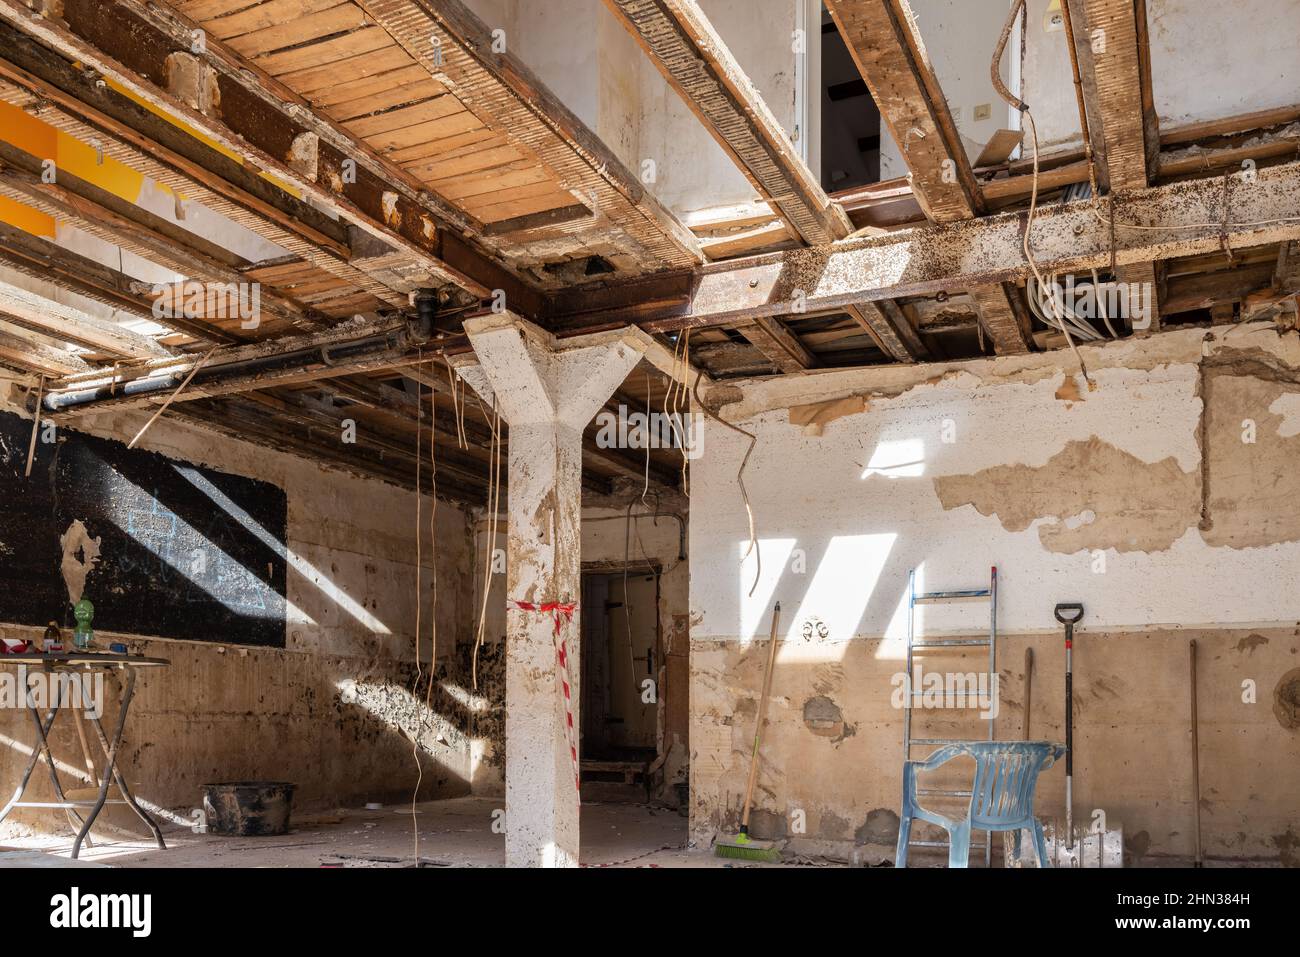 Restoration of a water damage in a house Stock Photo